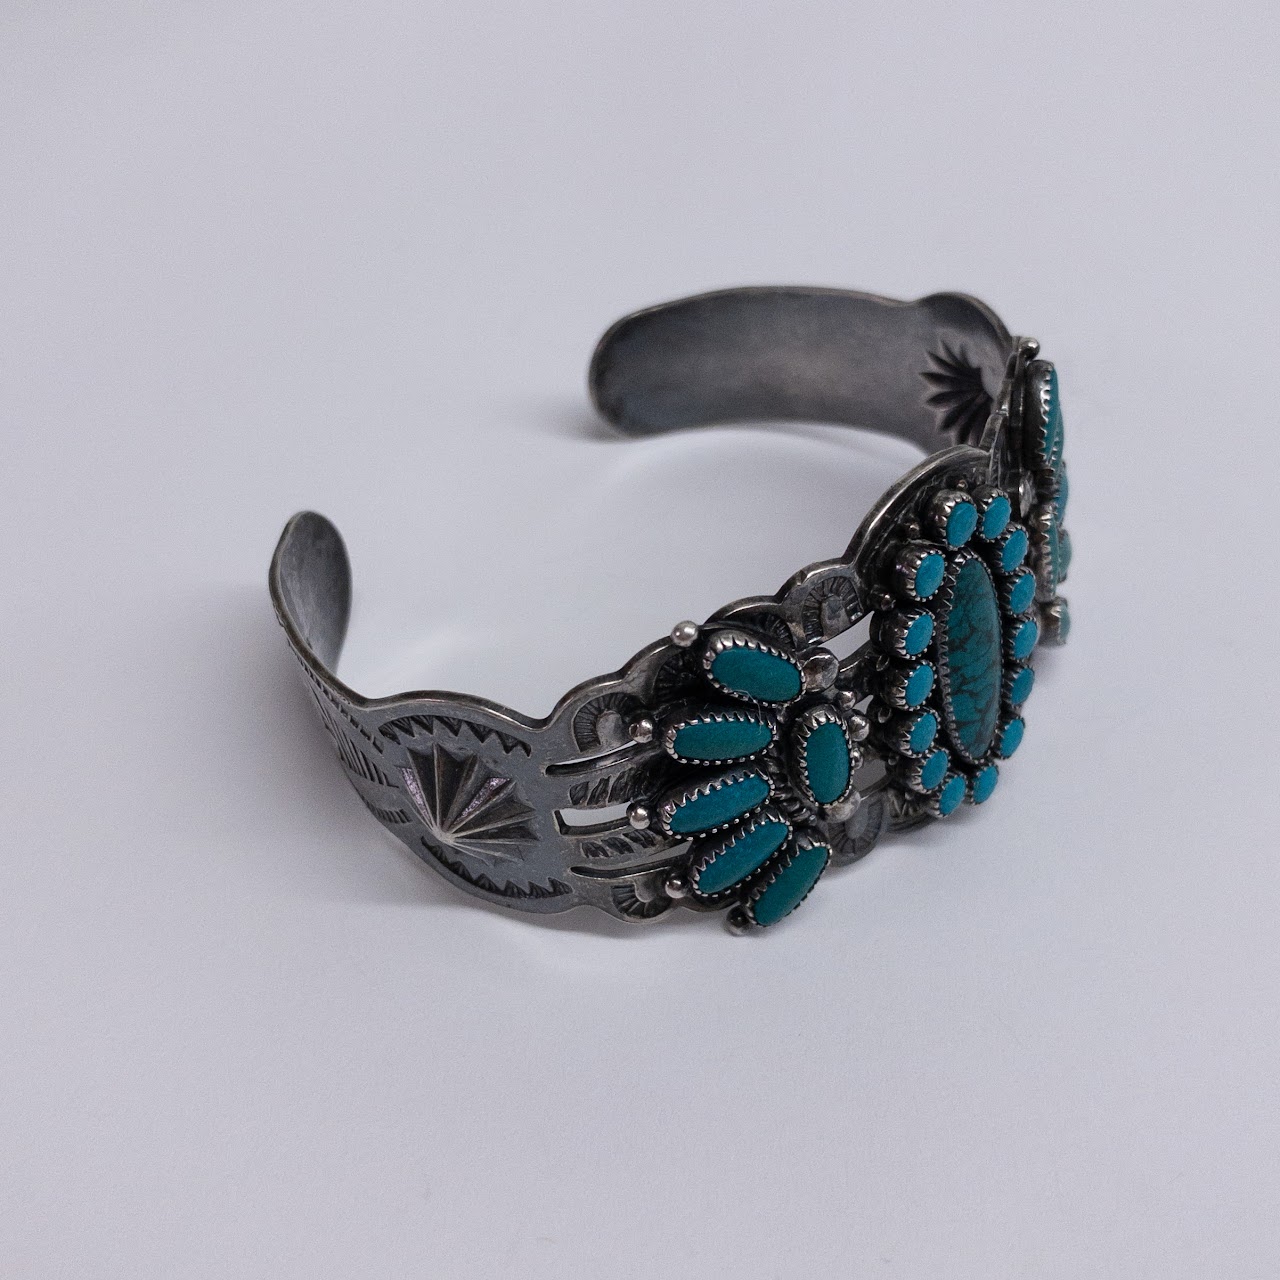 Sterling Silver & Turquoise Cuff Bracelet